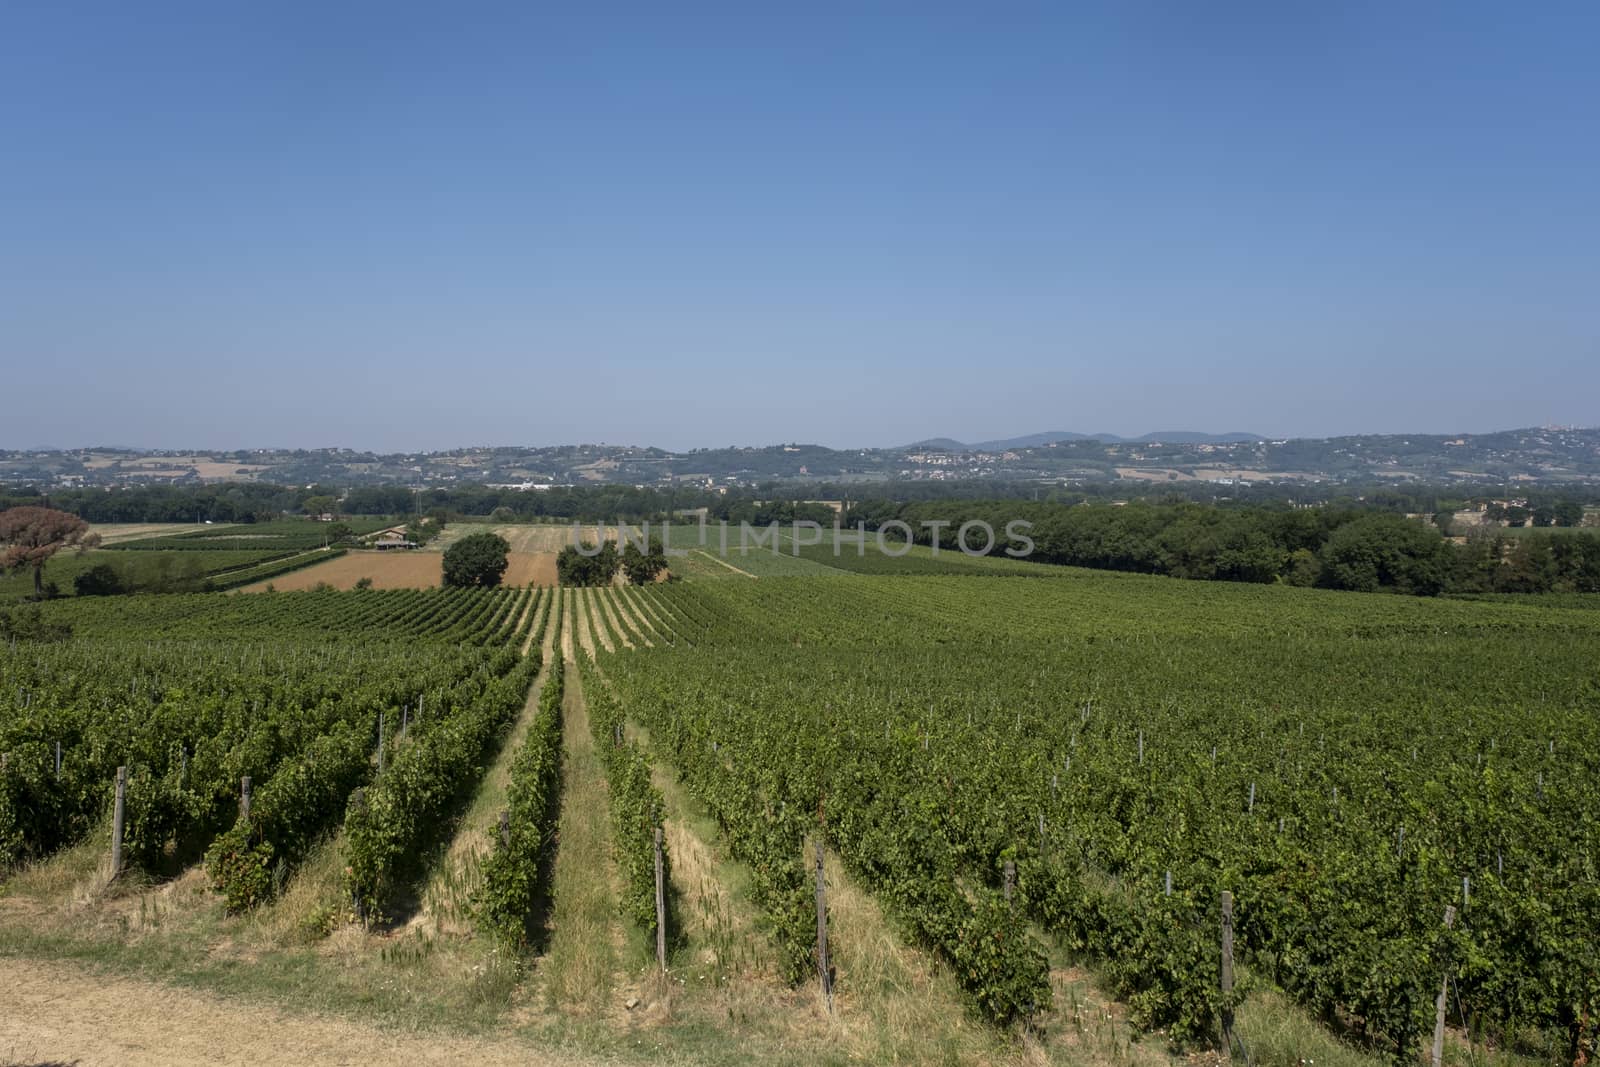 Panoramic view of scenic Tuscany landscape with vineyard in the Chianti region, Tuscany, Italy by Tjeerdkruse